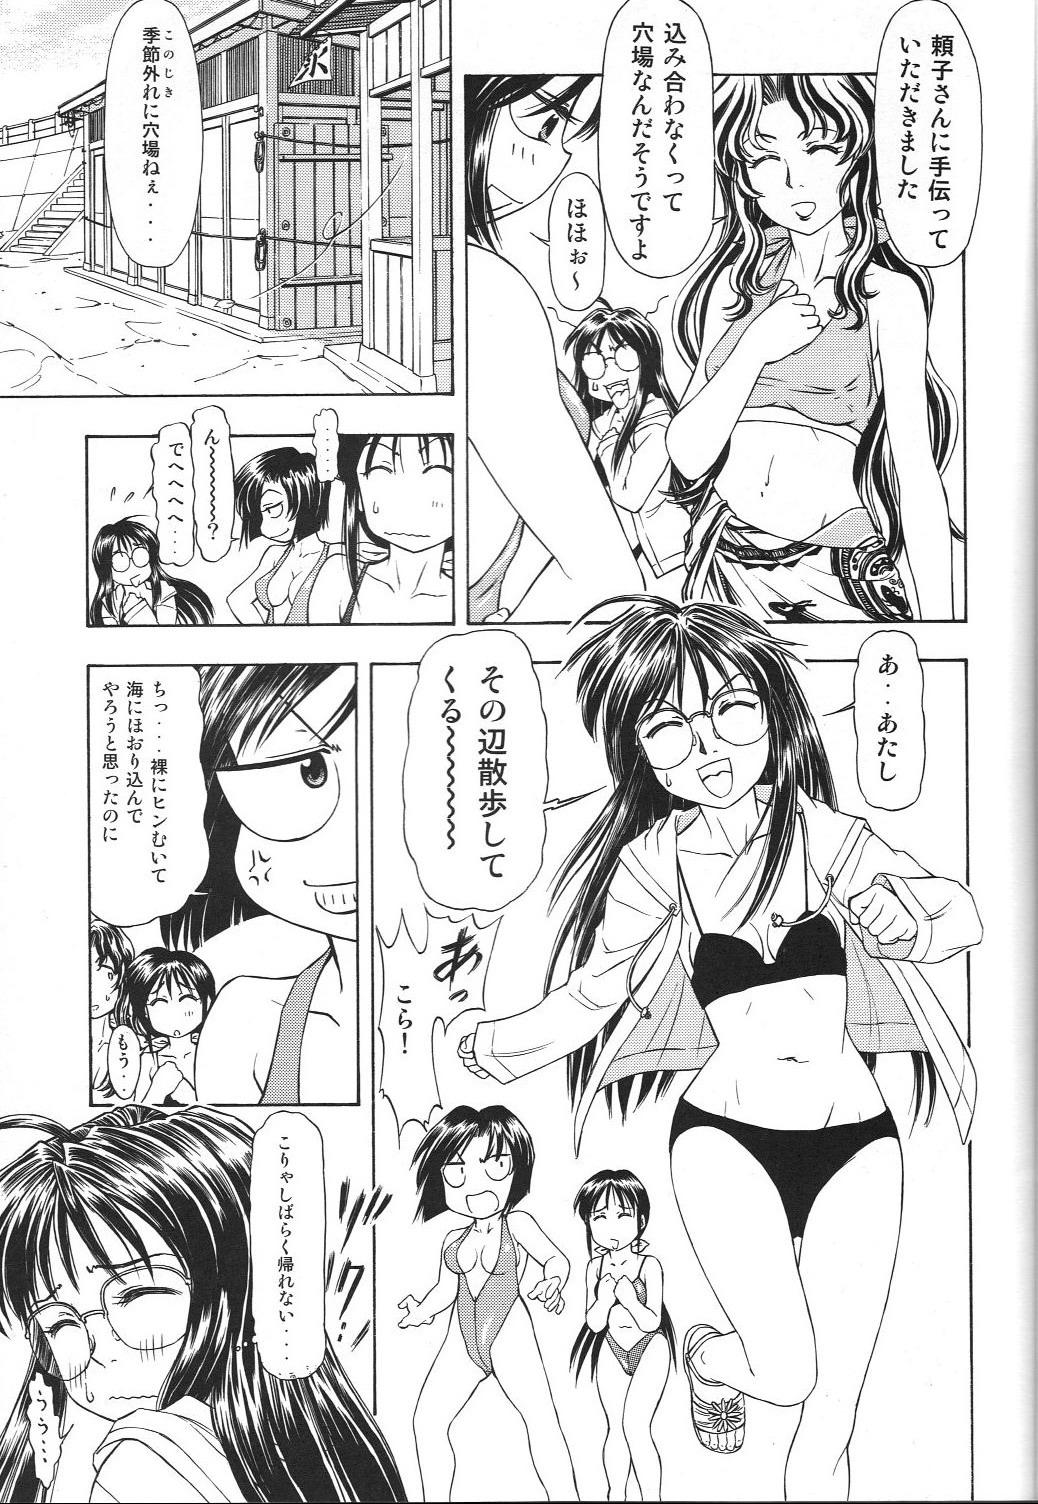 Free Fuck TAIHO++ file02 - Youre under arrest Mofos - Page 8